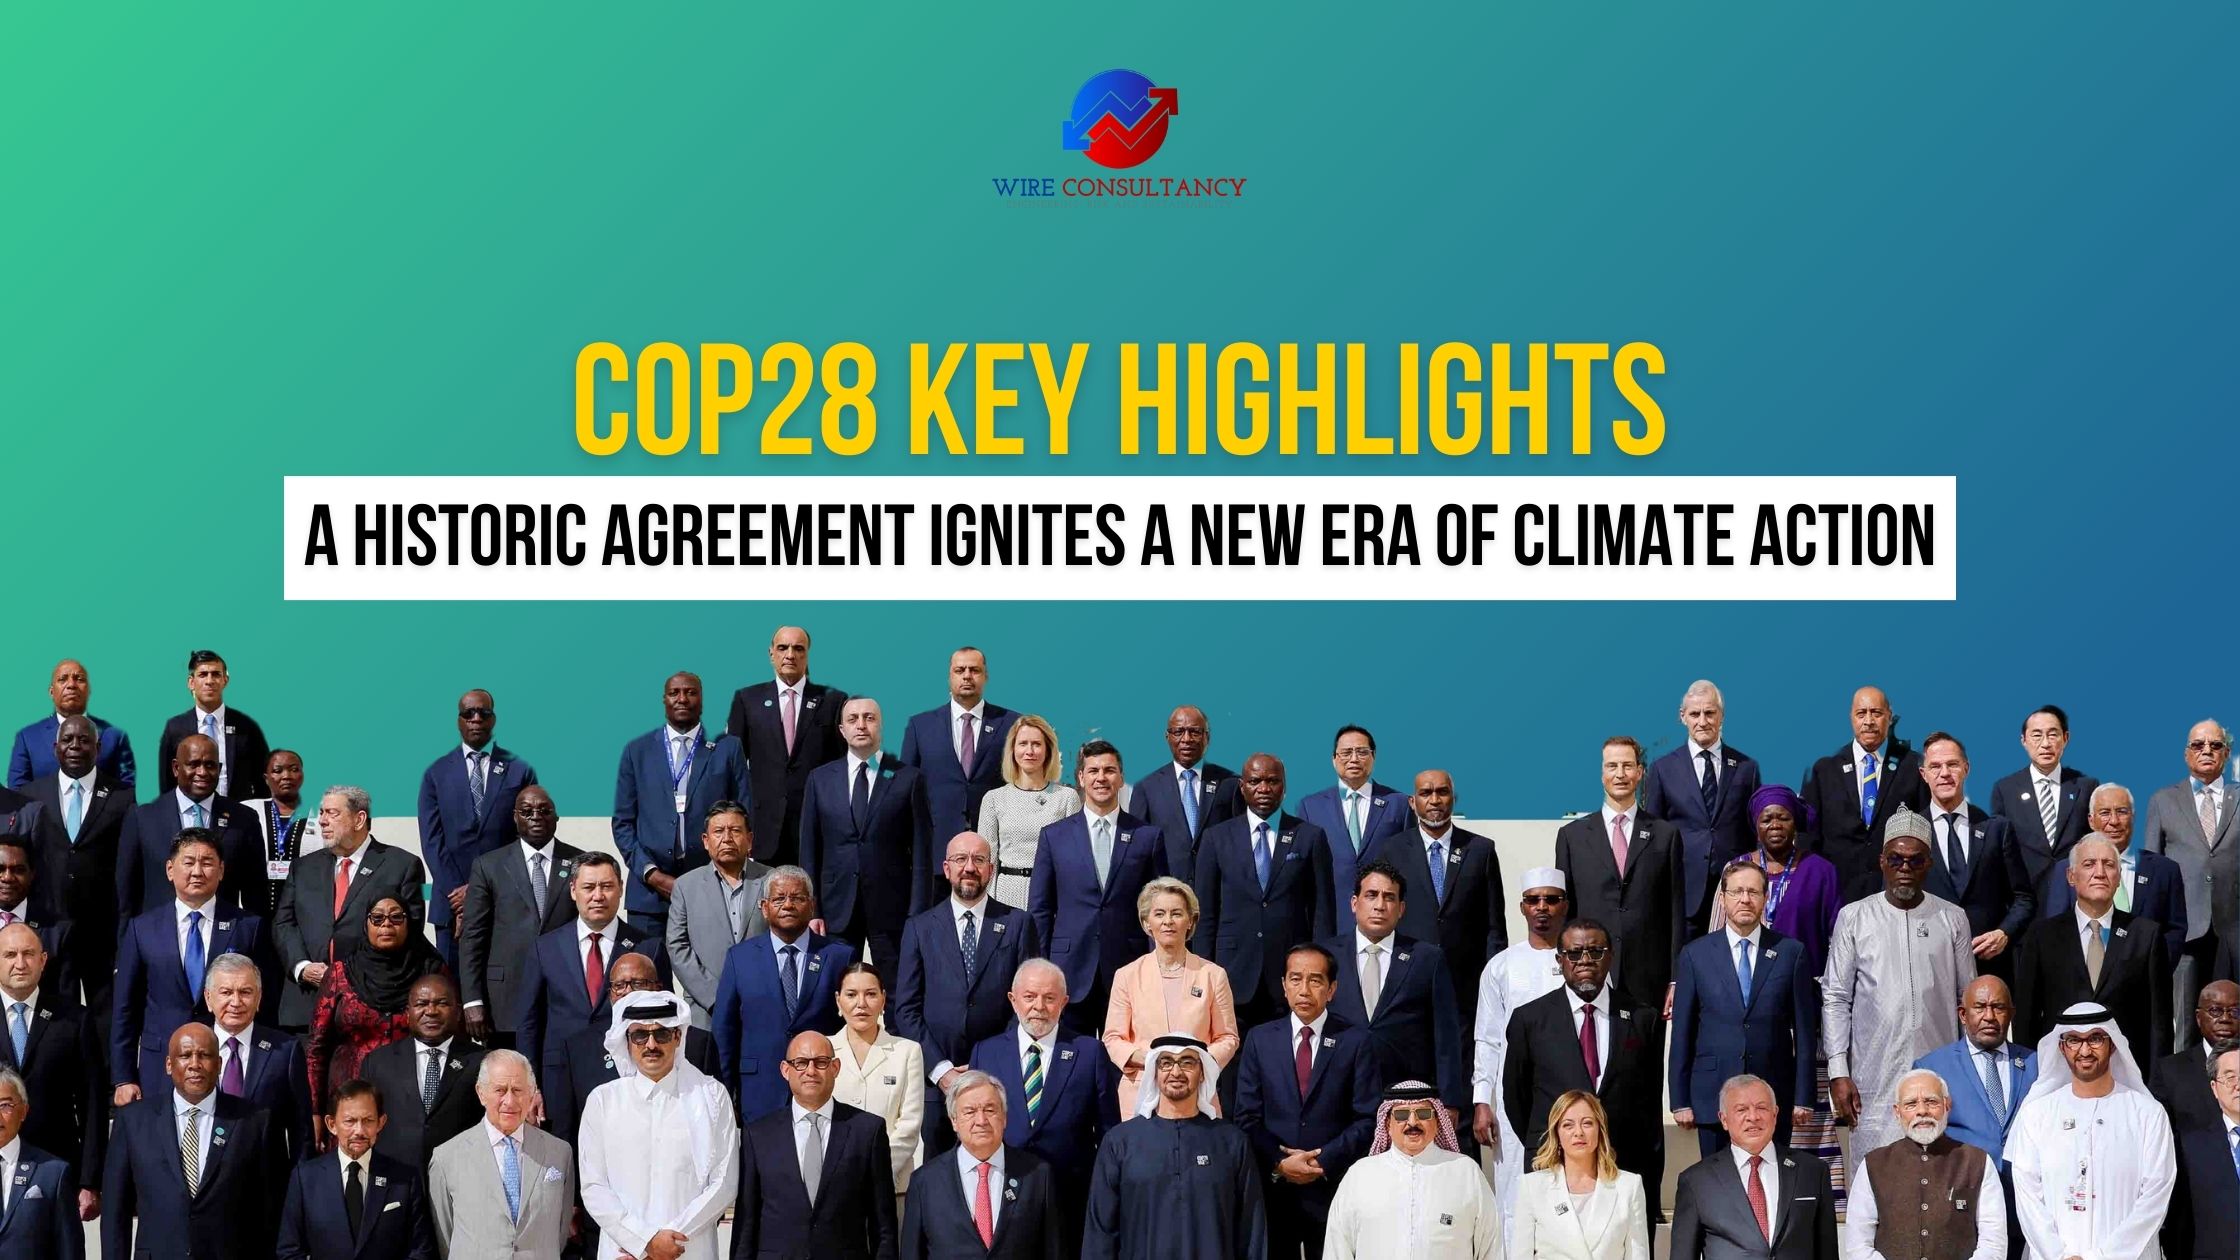 COP28 Key Highlights: A Historic Agreement Ignites a New Era of Climate Action